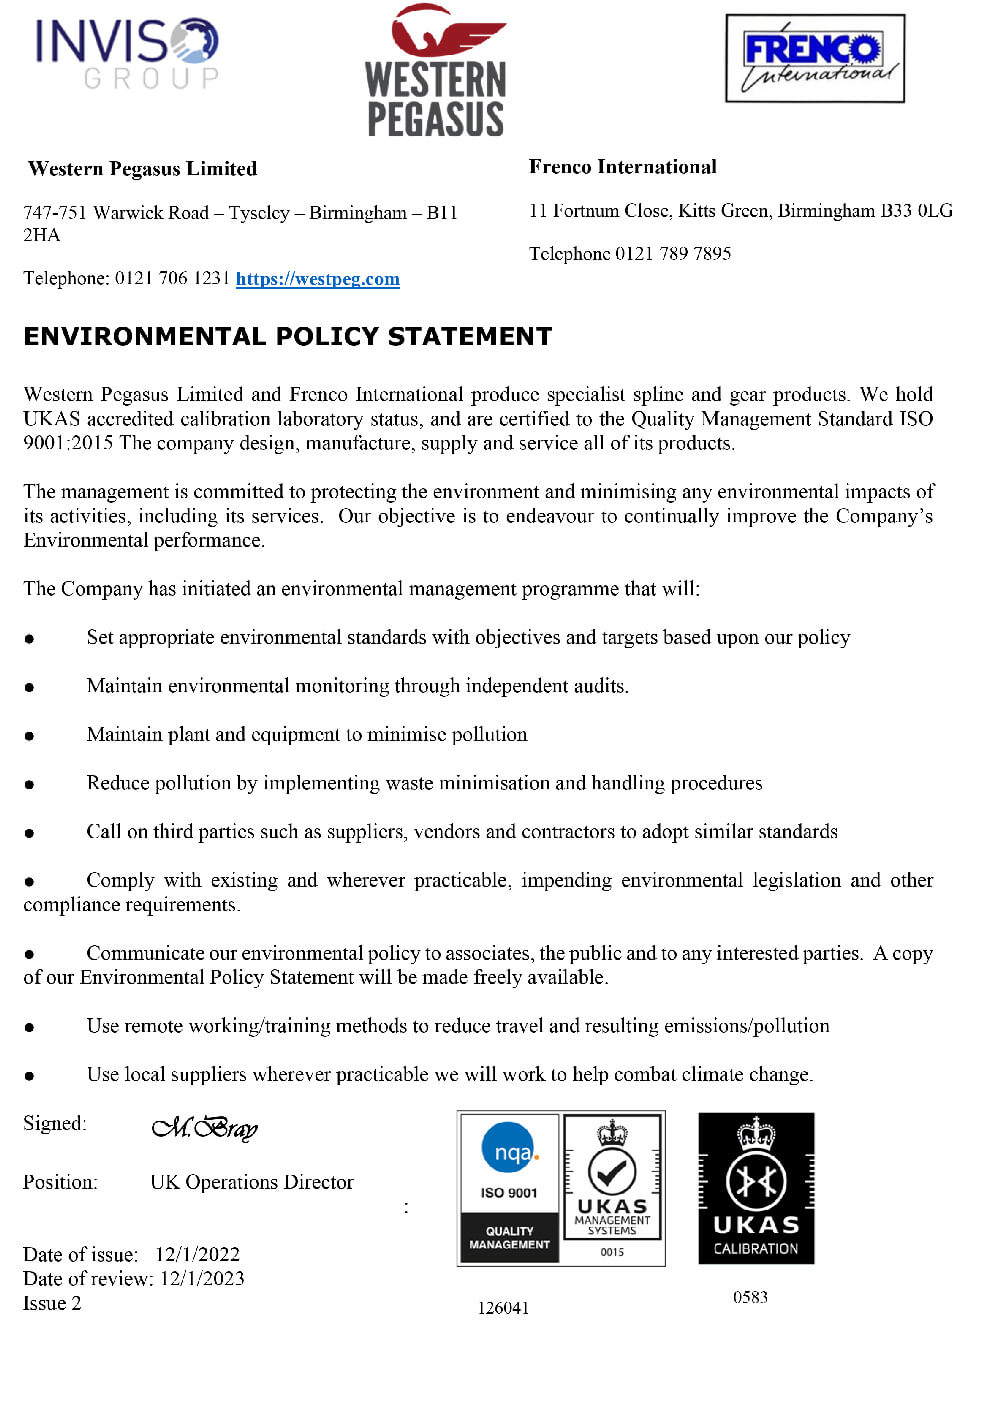 ISO:9001 Approved Group Environmental Policy Statement Western Pegasus Issue 2 January 2022